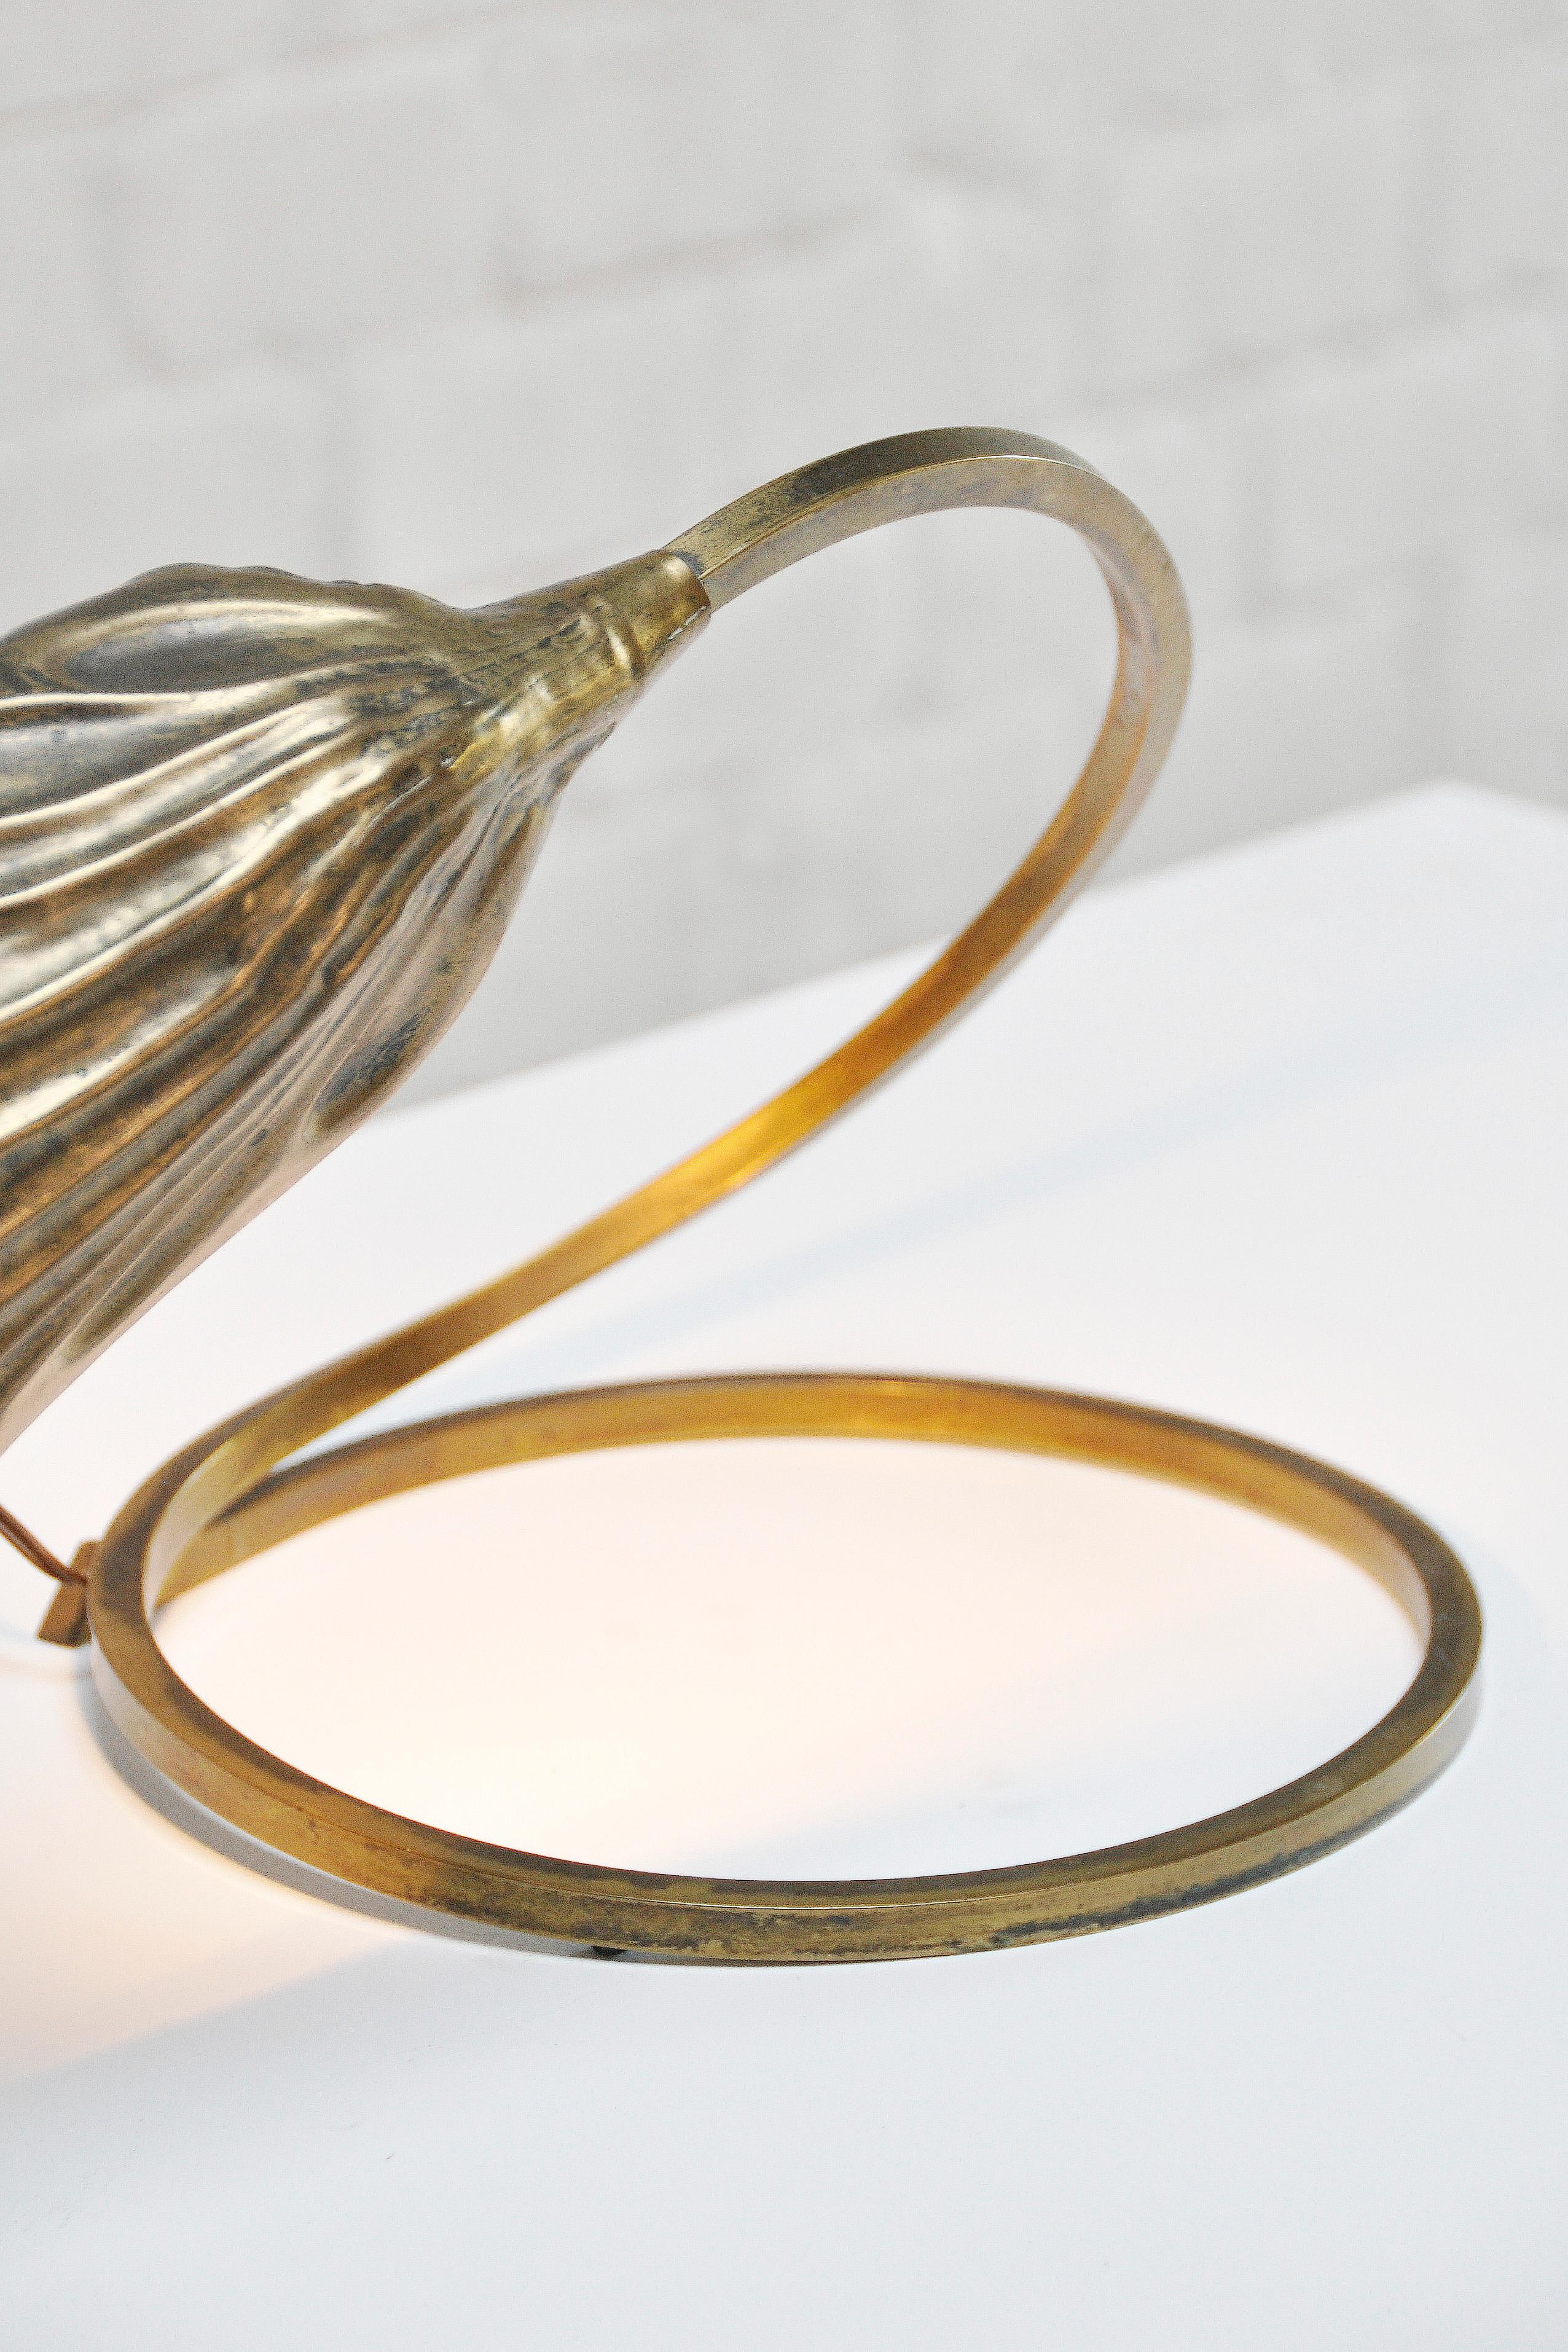 Italian Leaf Shaped Table Lamp in Brass by Tommaso Barbi for Carlo Giorgi, 1970s For Sale 2